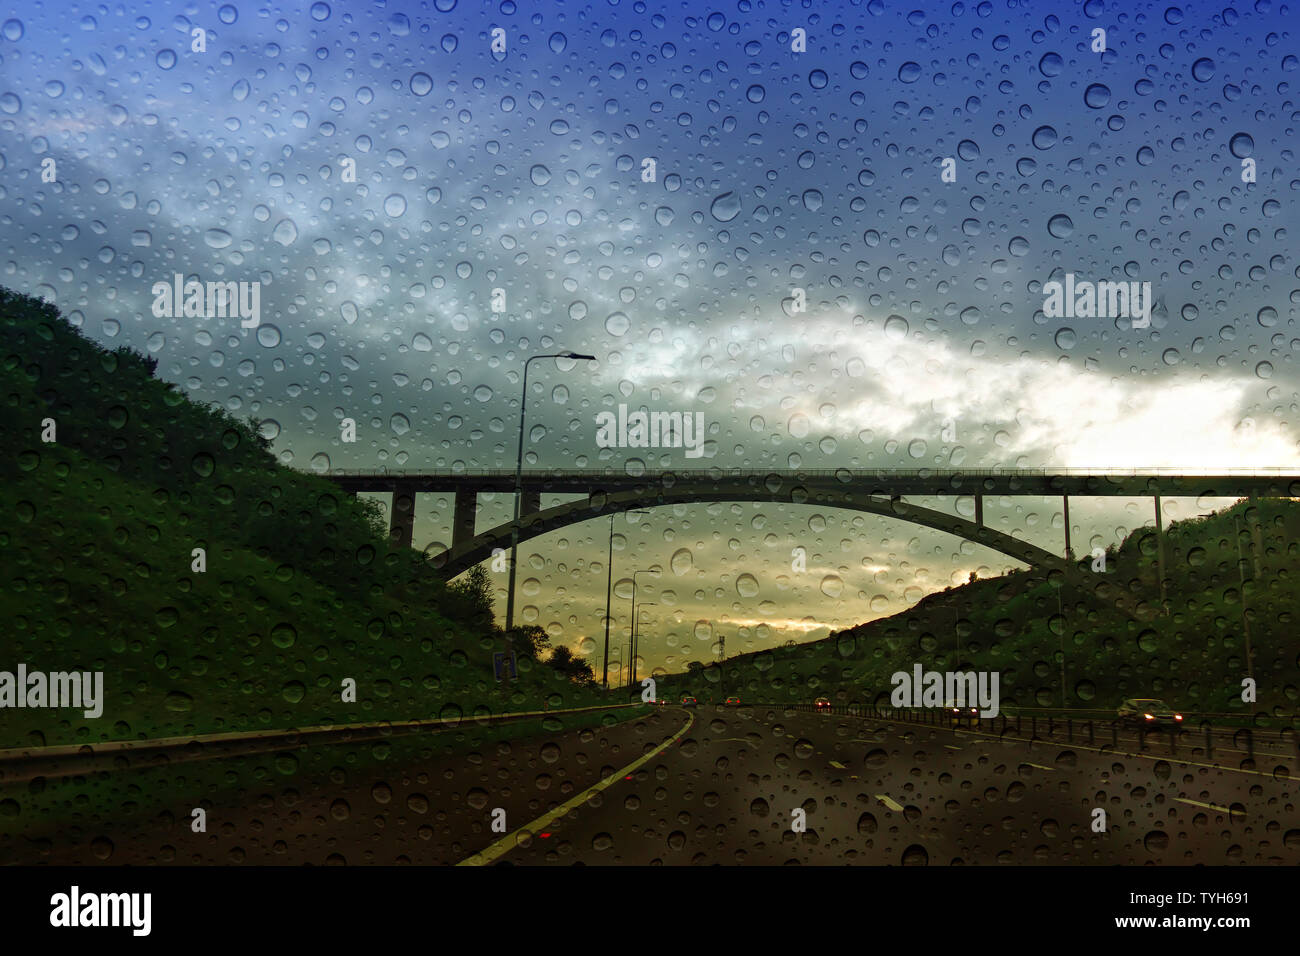 M62 motorway traffic approaching Scammonden Bridge at dusk with rain drops on the windscreen Stock Photo